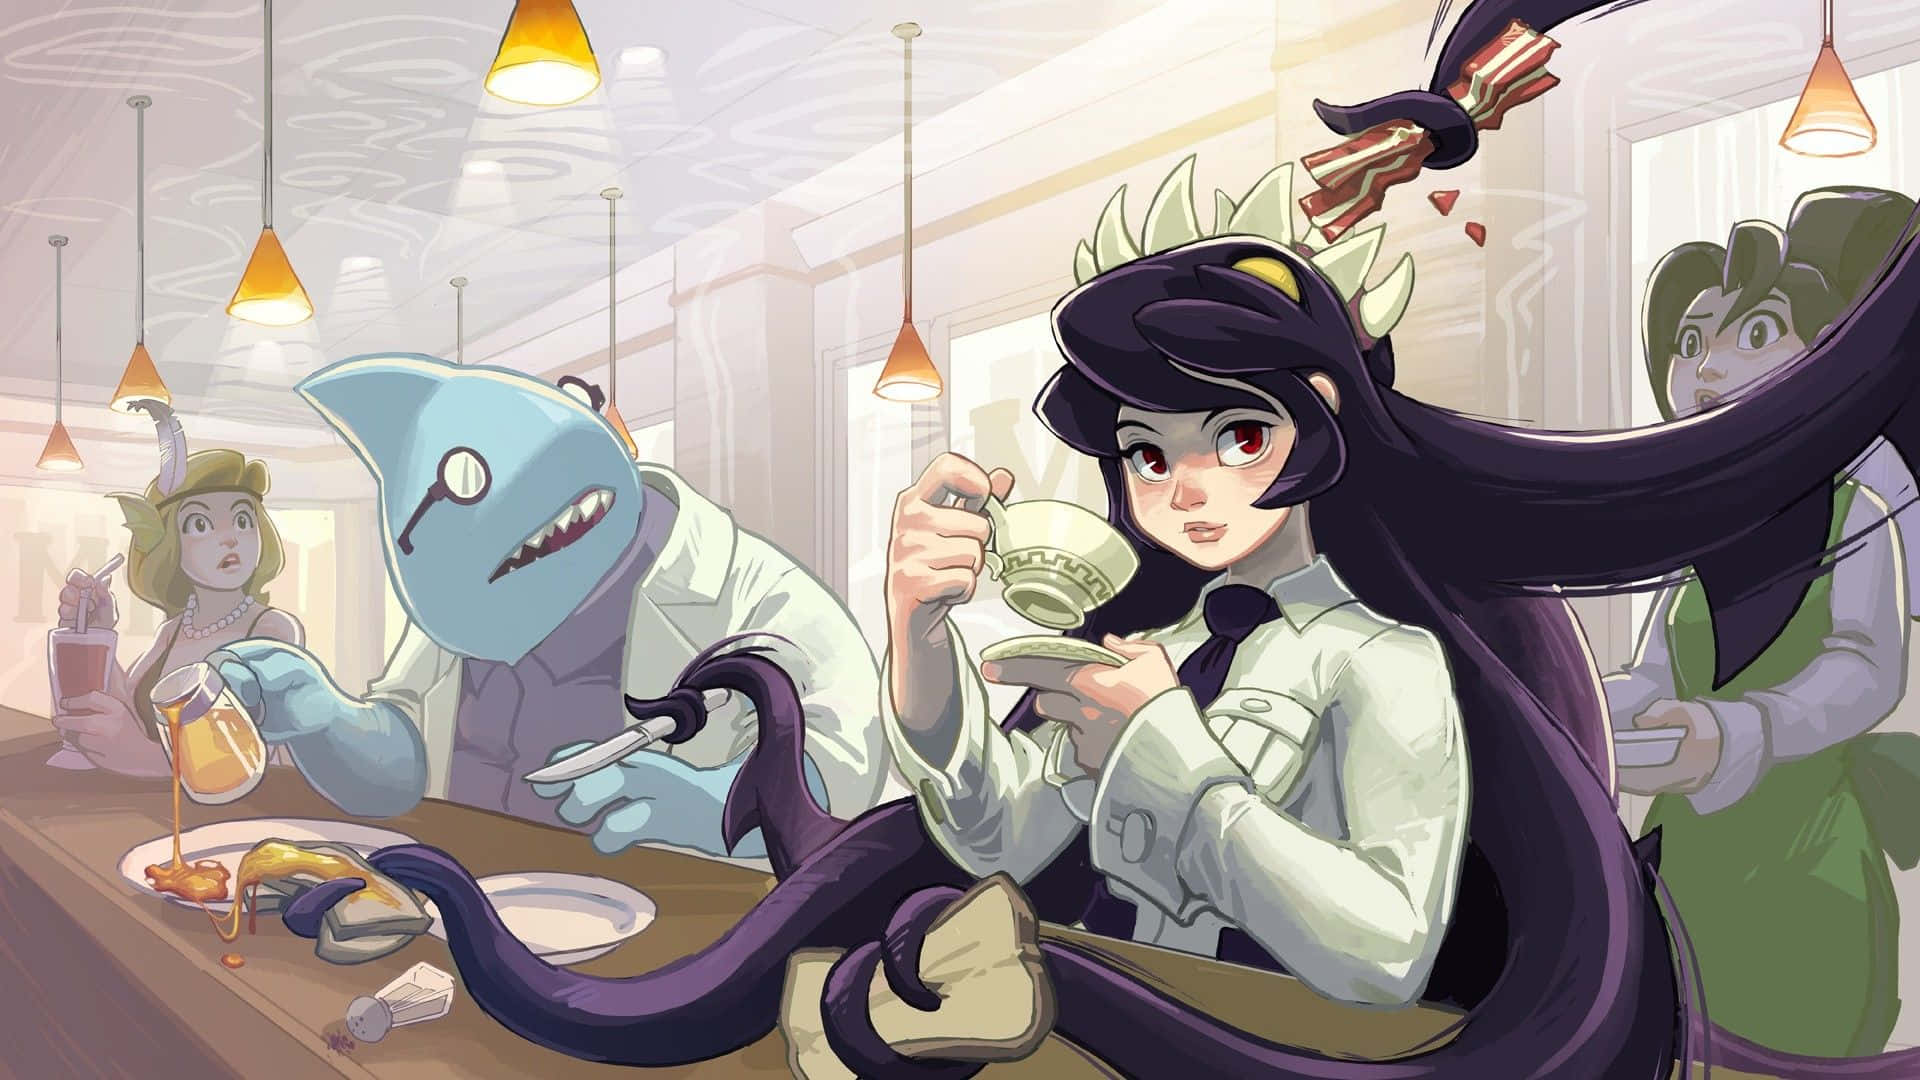 Unite the forces of good with the Skullgirls Wallpaper